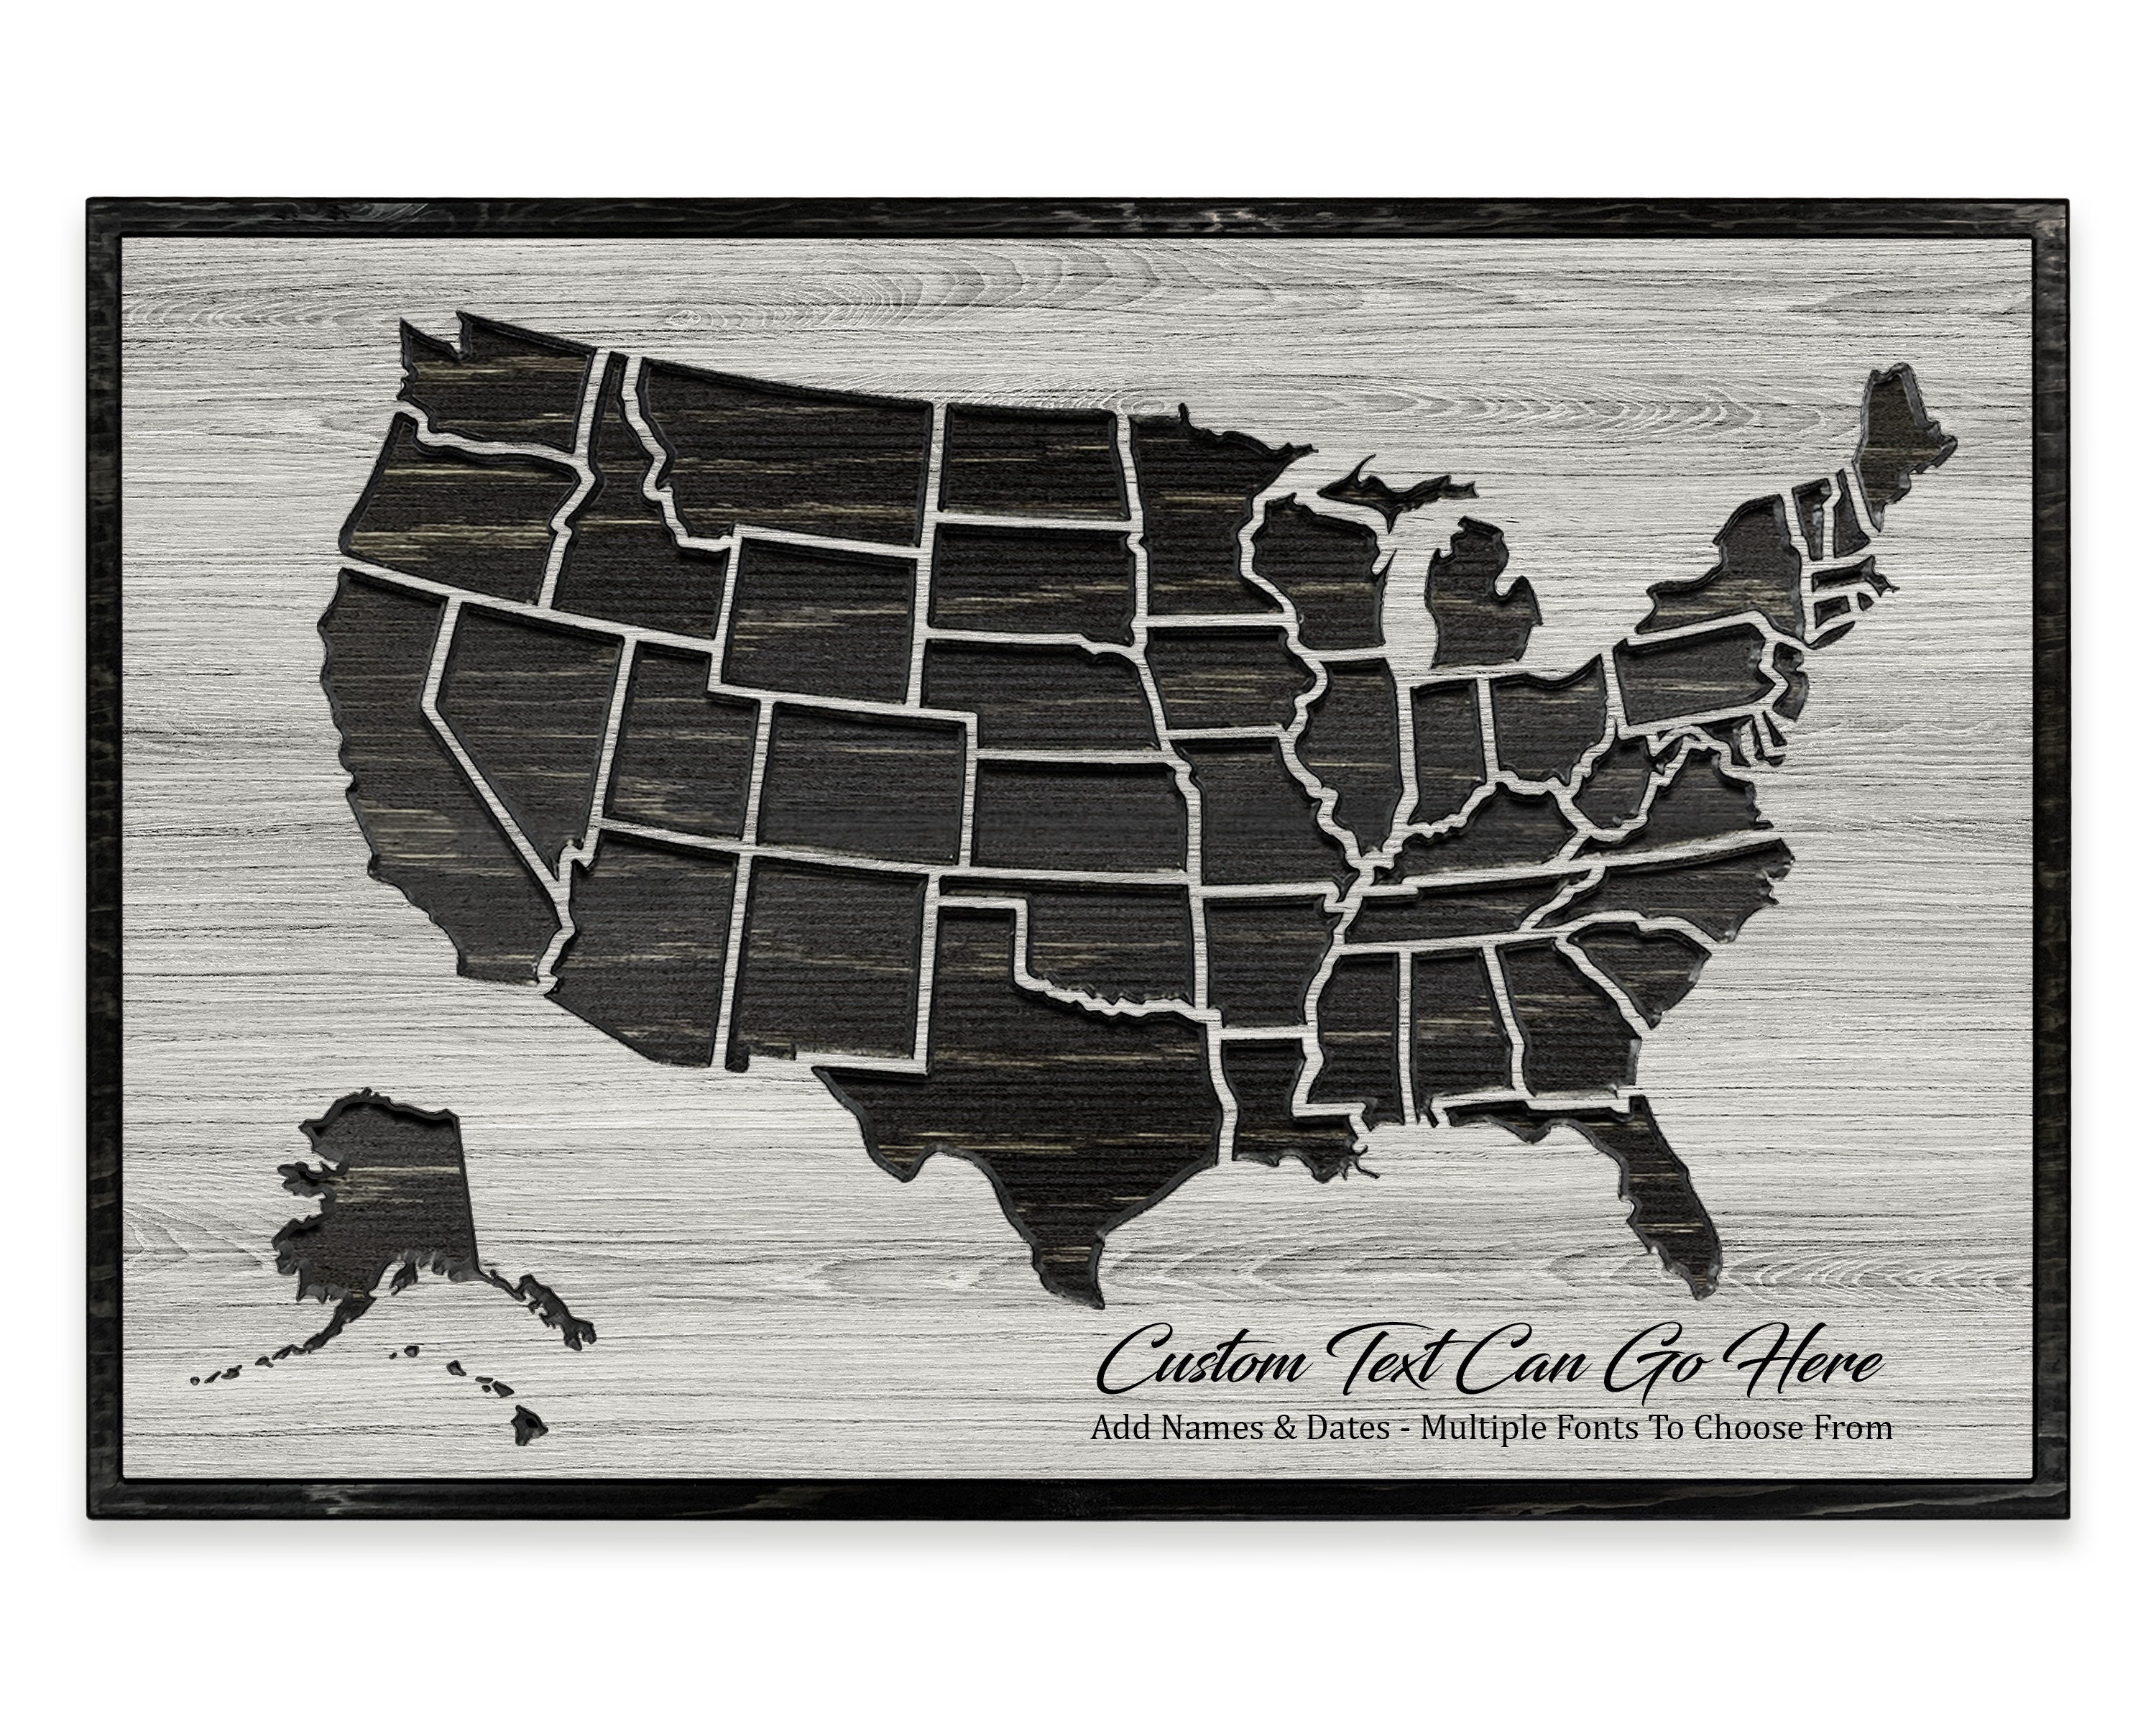 Us Map Wall Art, Customizes Text, Travel Log, Of United States, Push Pin Map, Pictures, Print, Canvas, Usa, America, Gift Ideas, Rustic